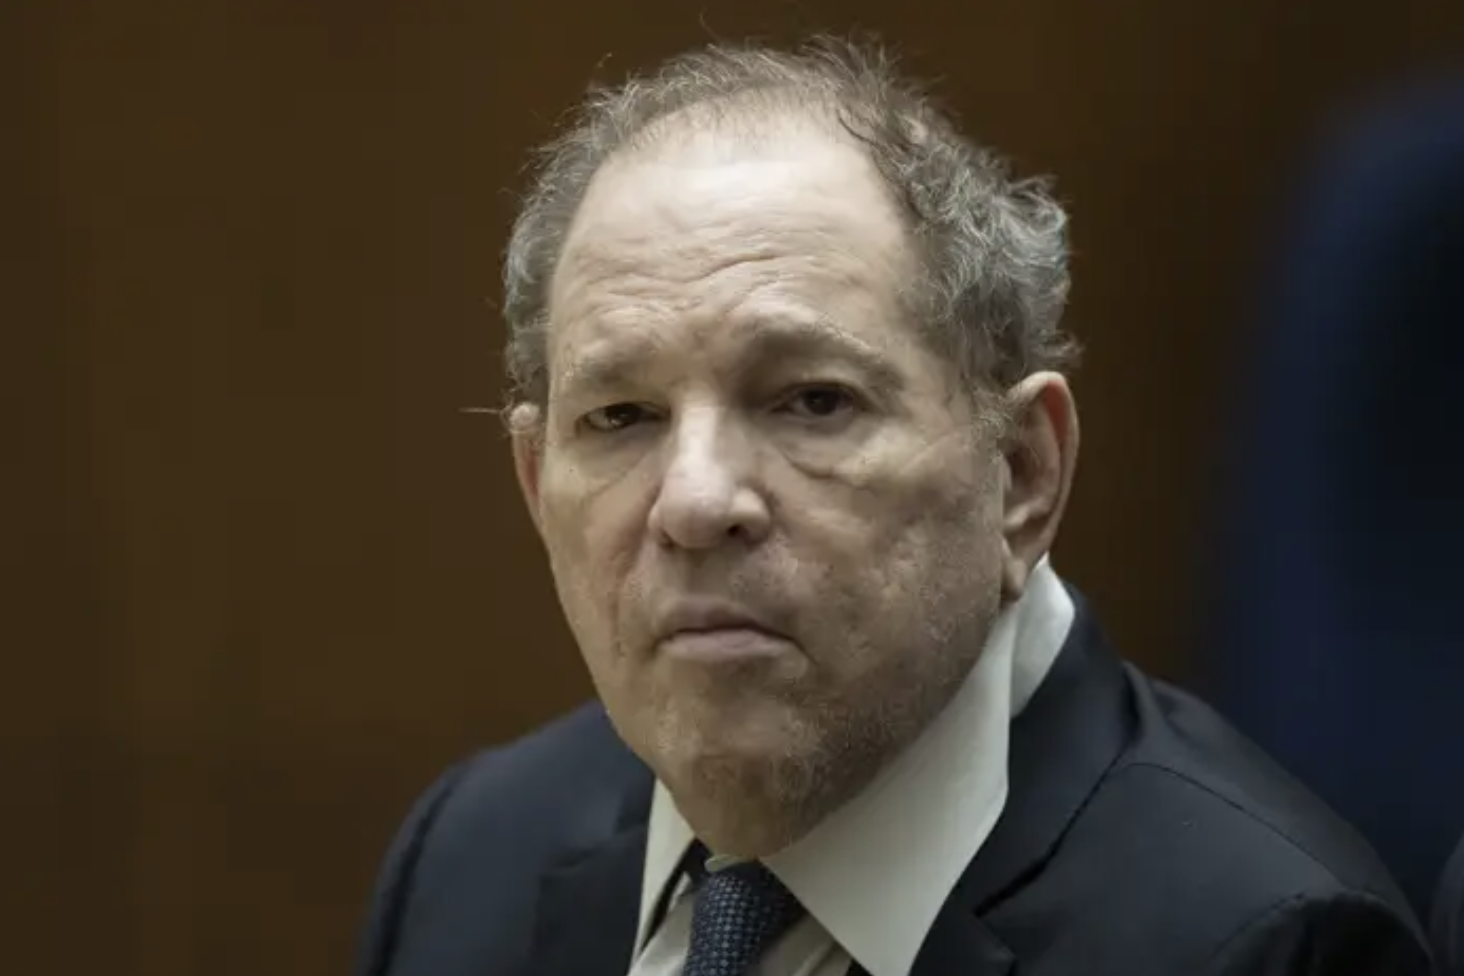 harvey weinstein in a suit grimacing and looking old and weary